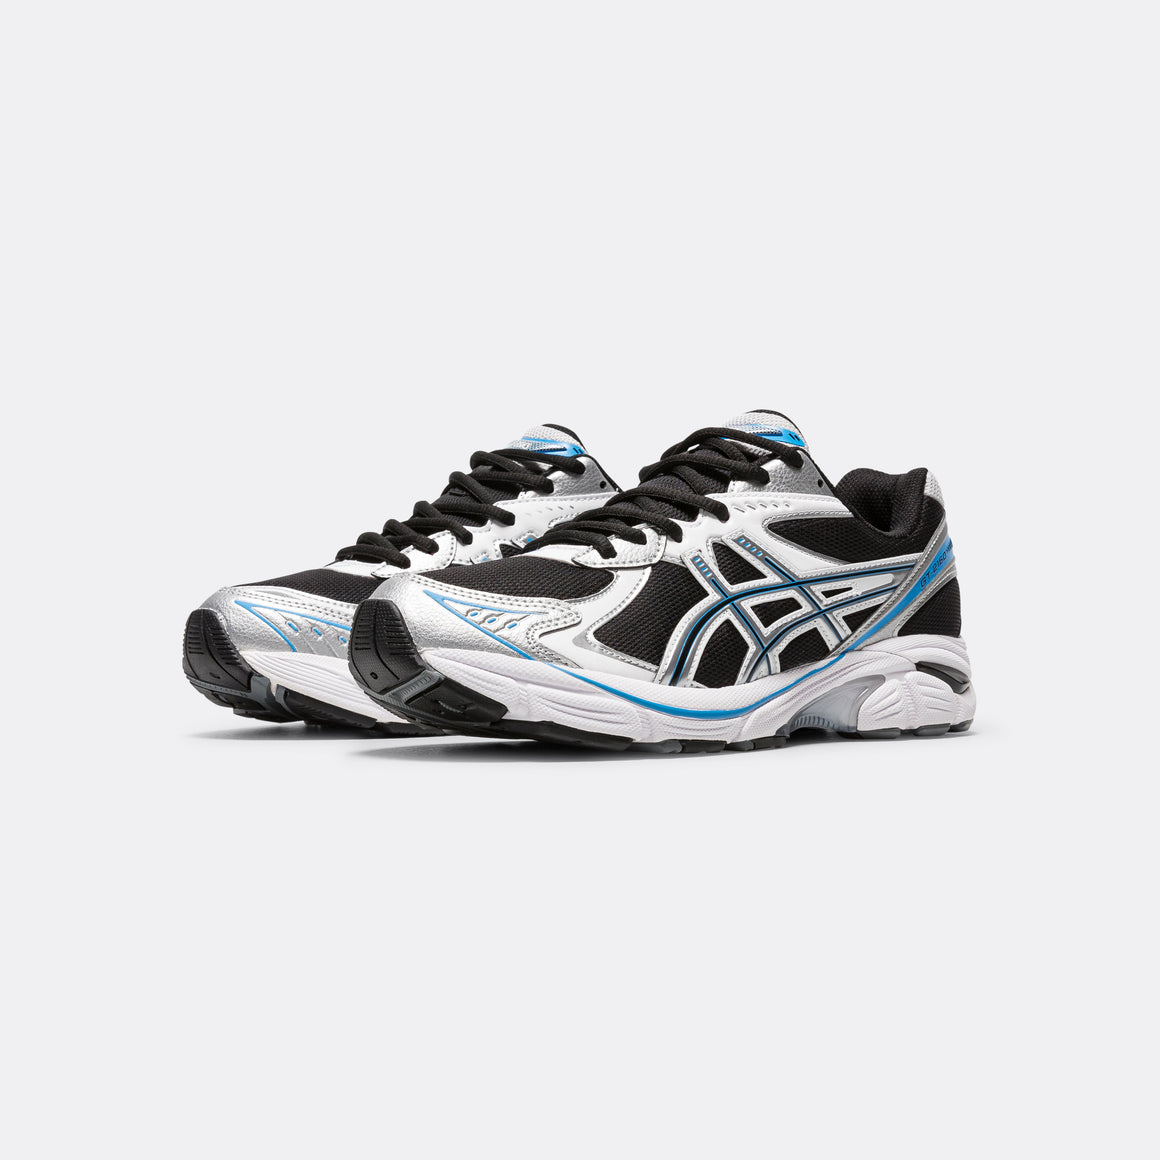 Asics - GT-2160 - Black/Silver - UP THERE